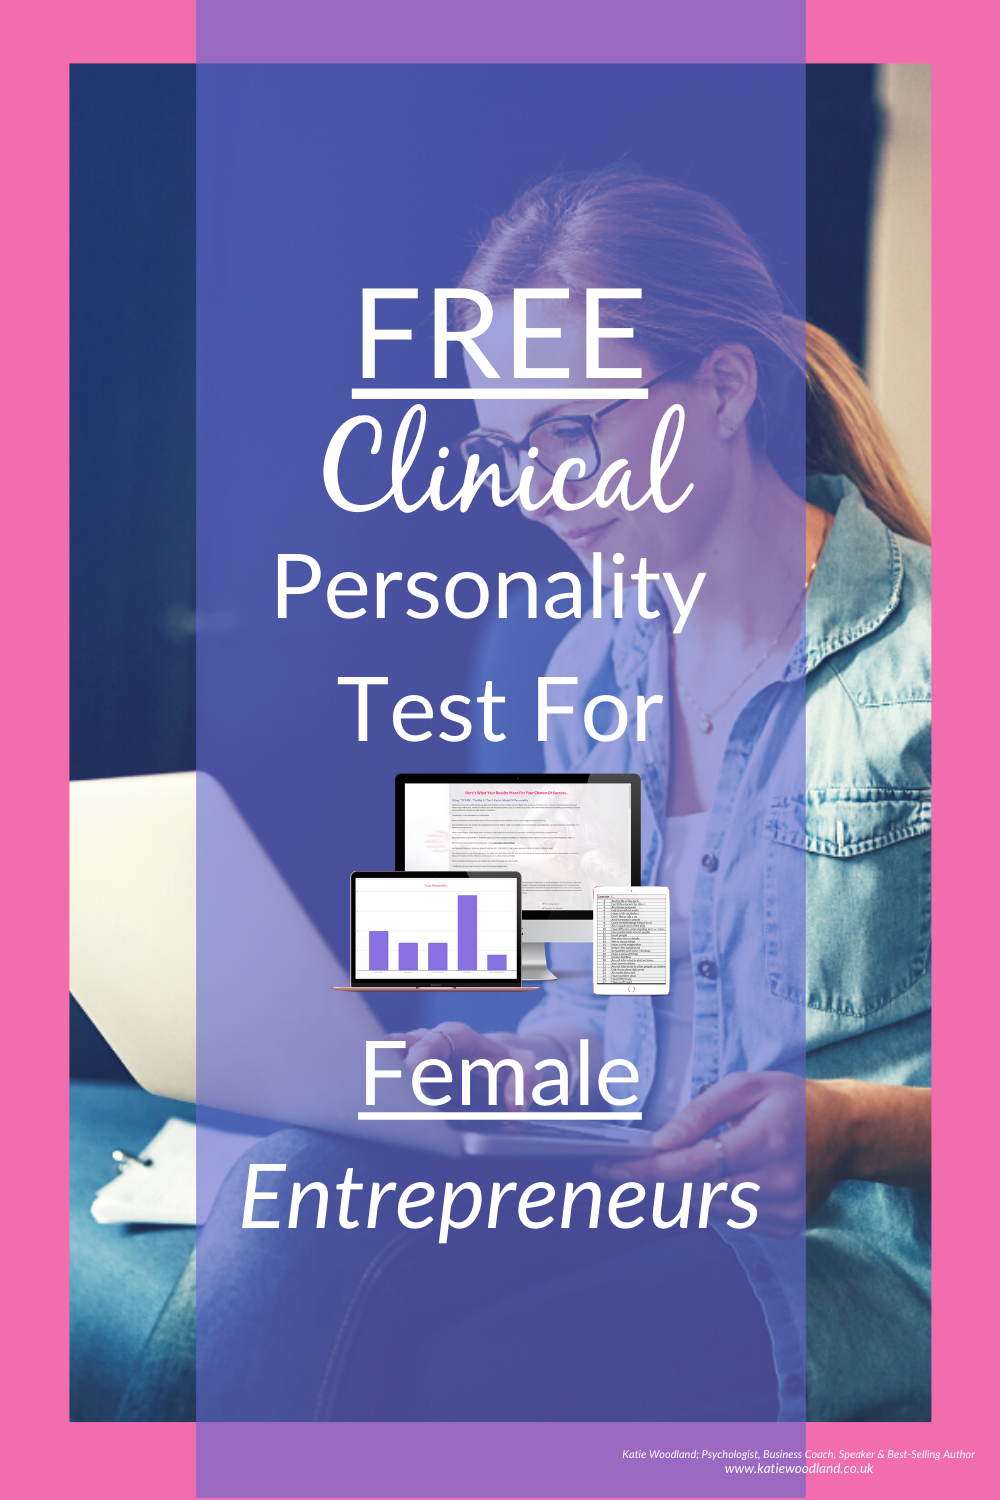 FREE Clinical Personality Test For Female Entrepreneurs